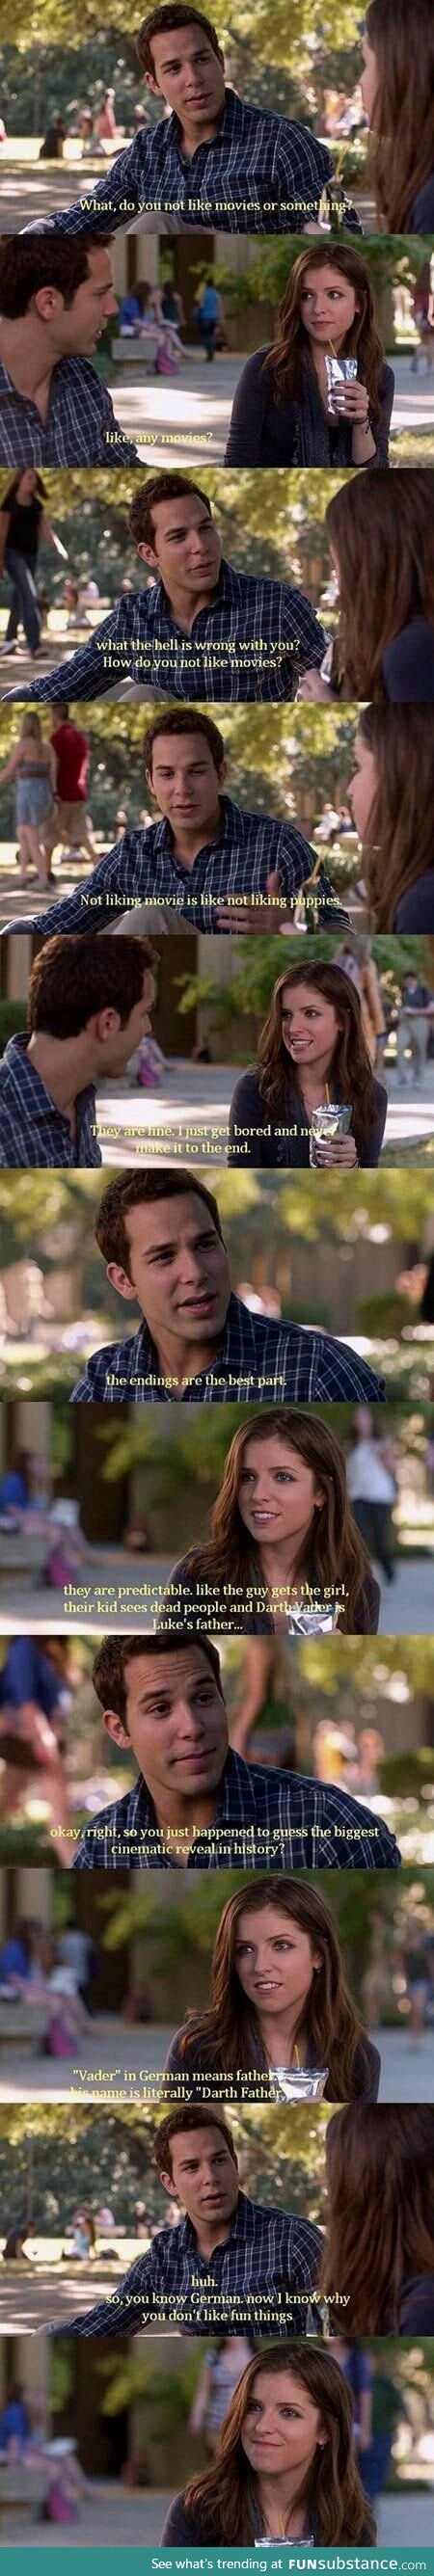 Love this scene from Pitch Perfect<3c: